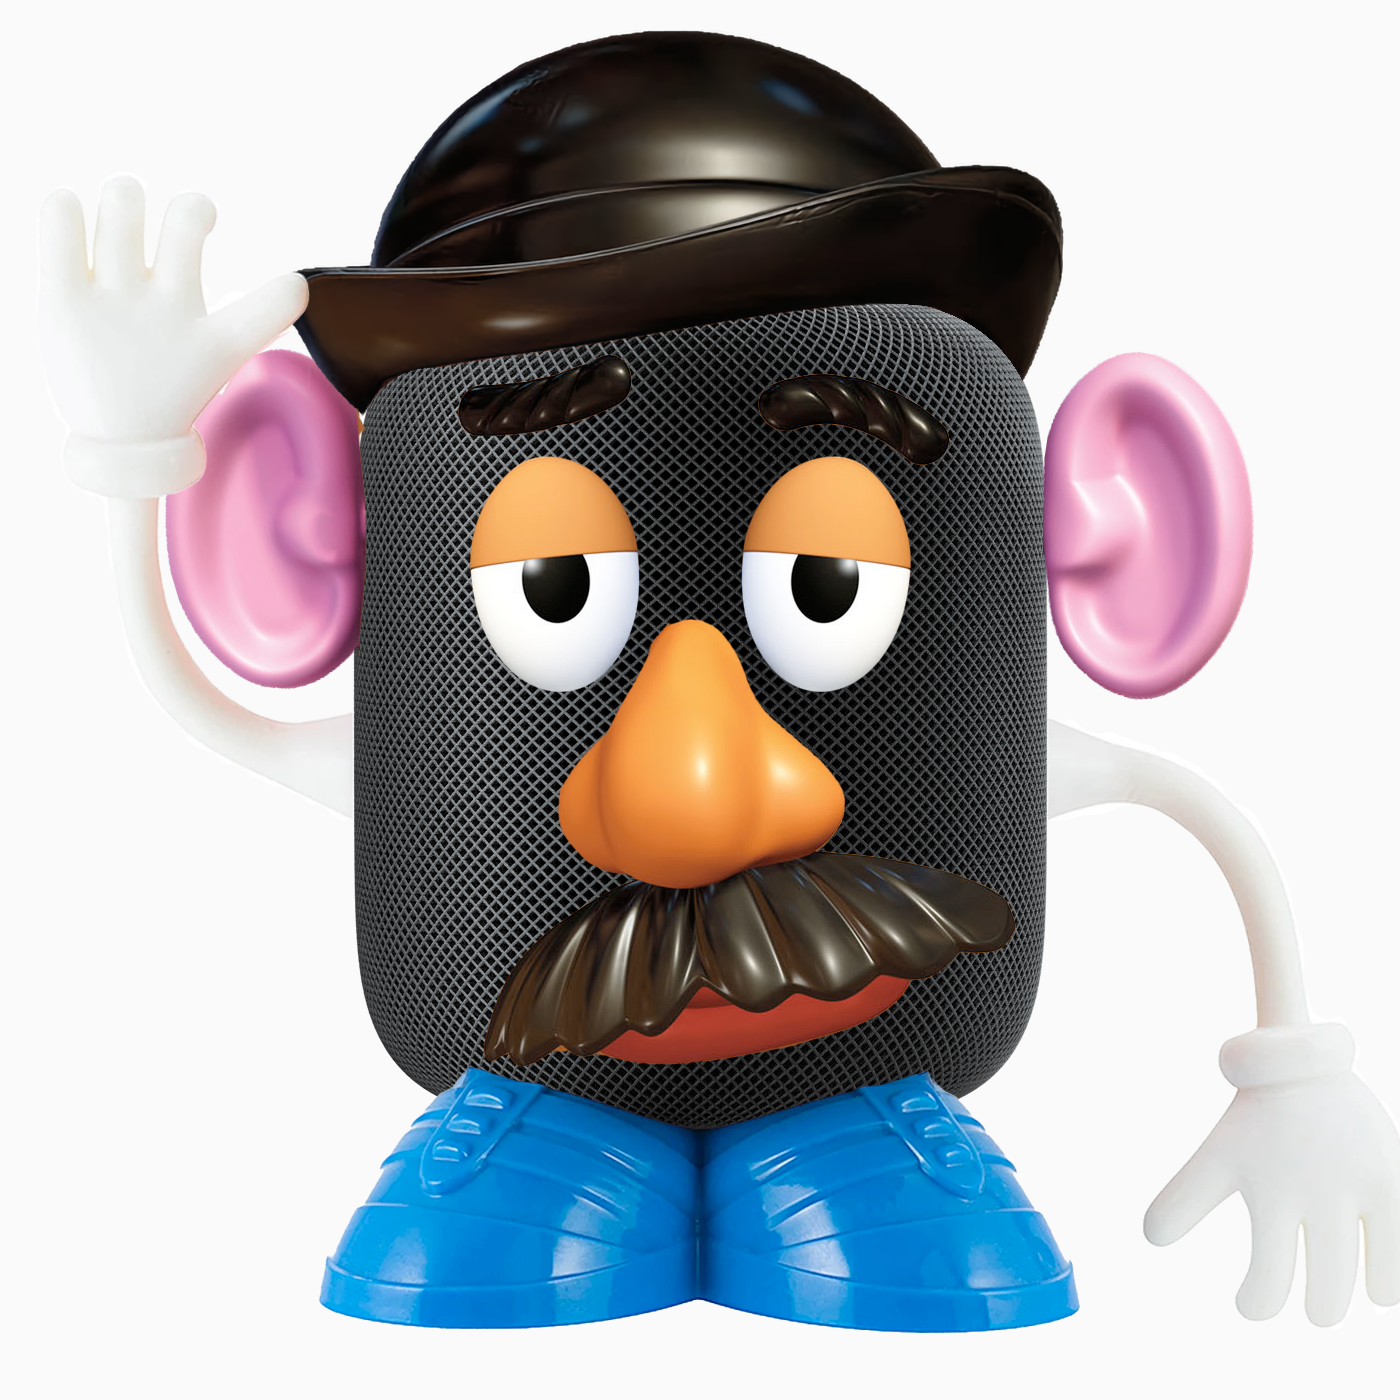 Mister HomePod Head (a black HomePod with Mister Potato Head accessories on it.)